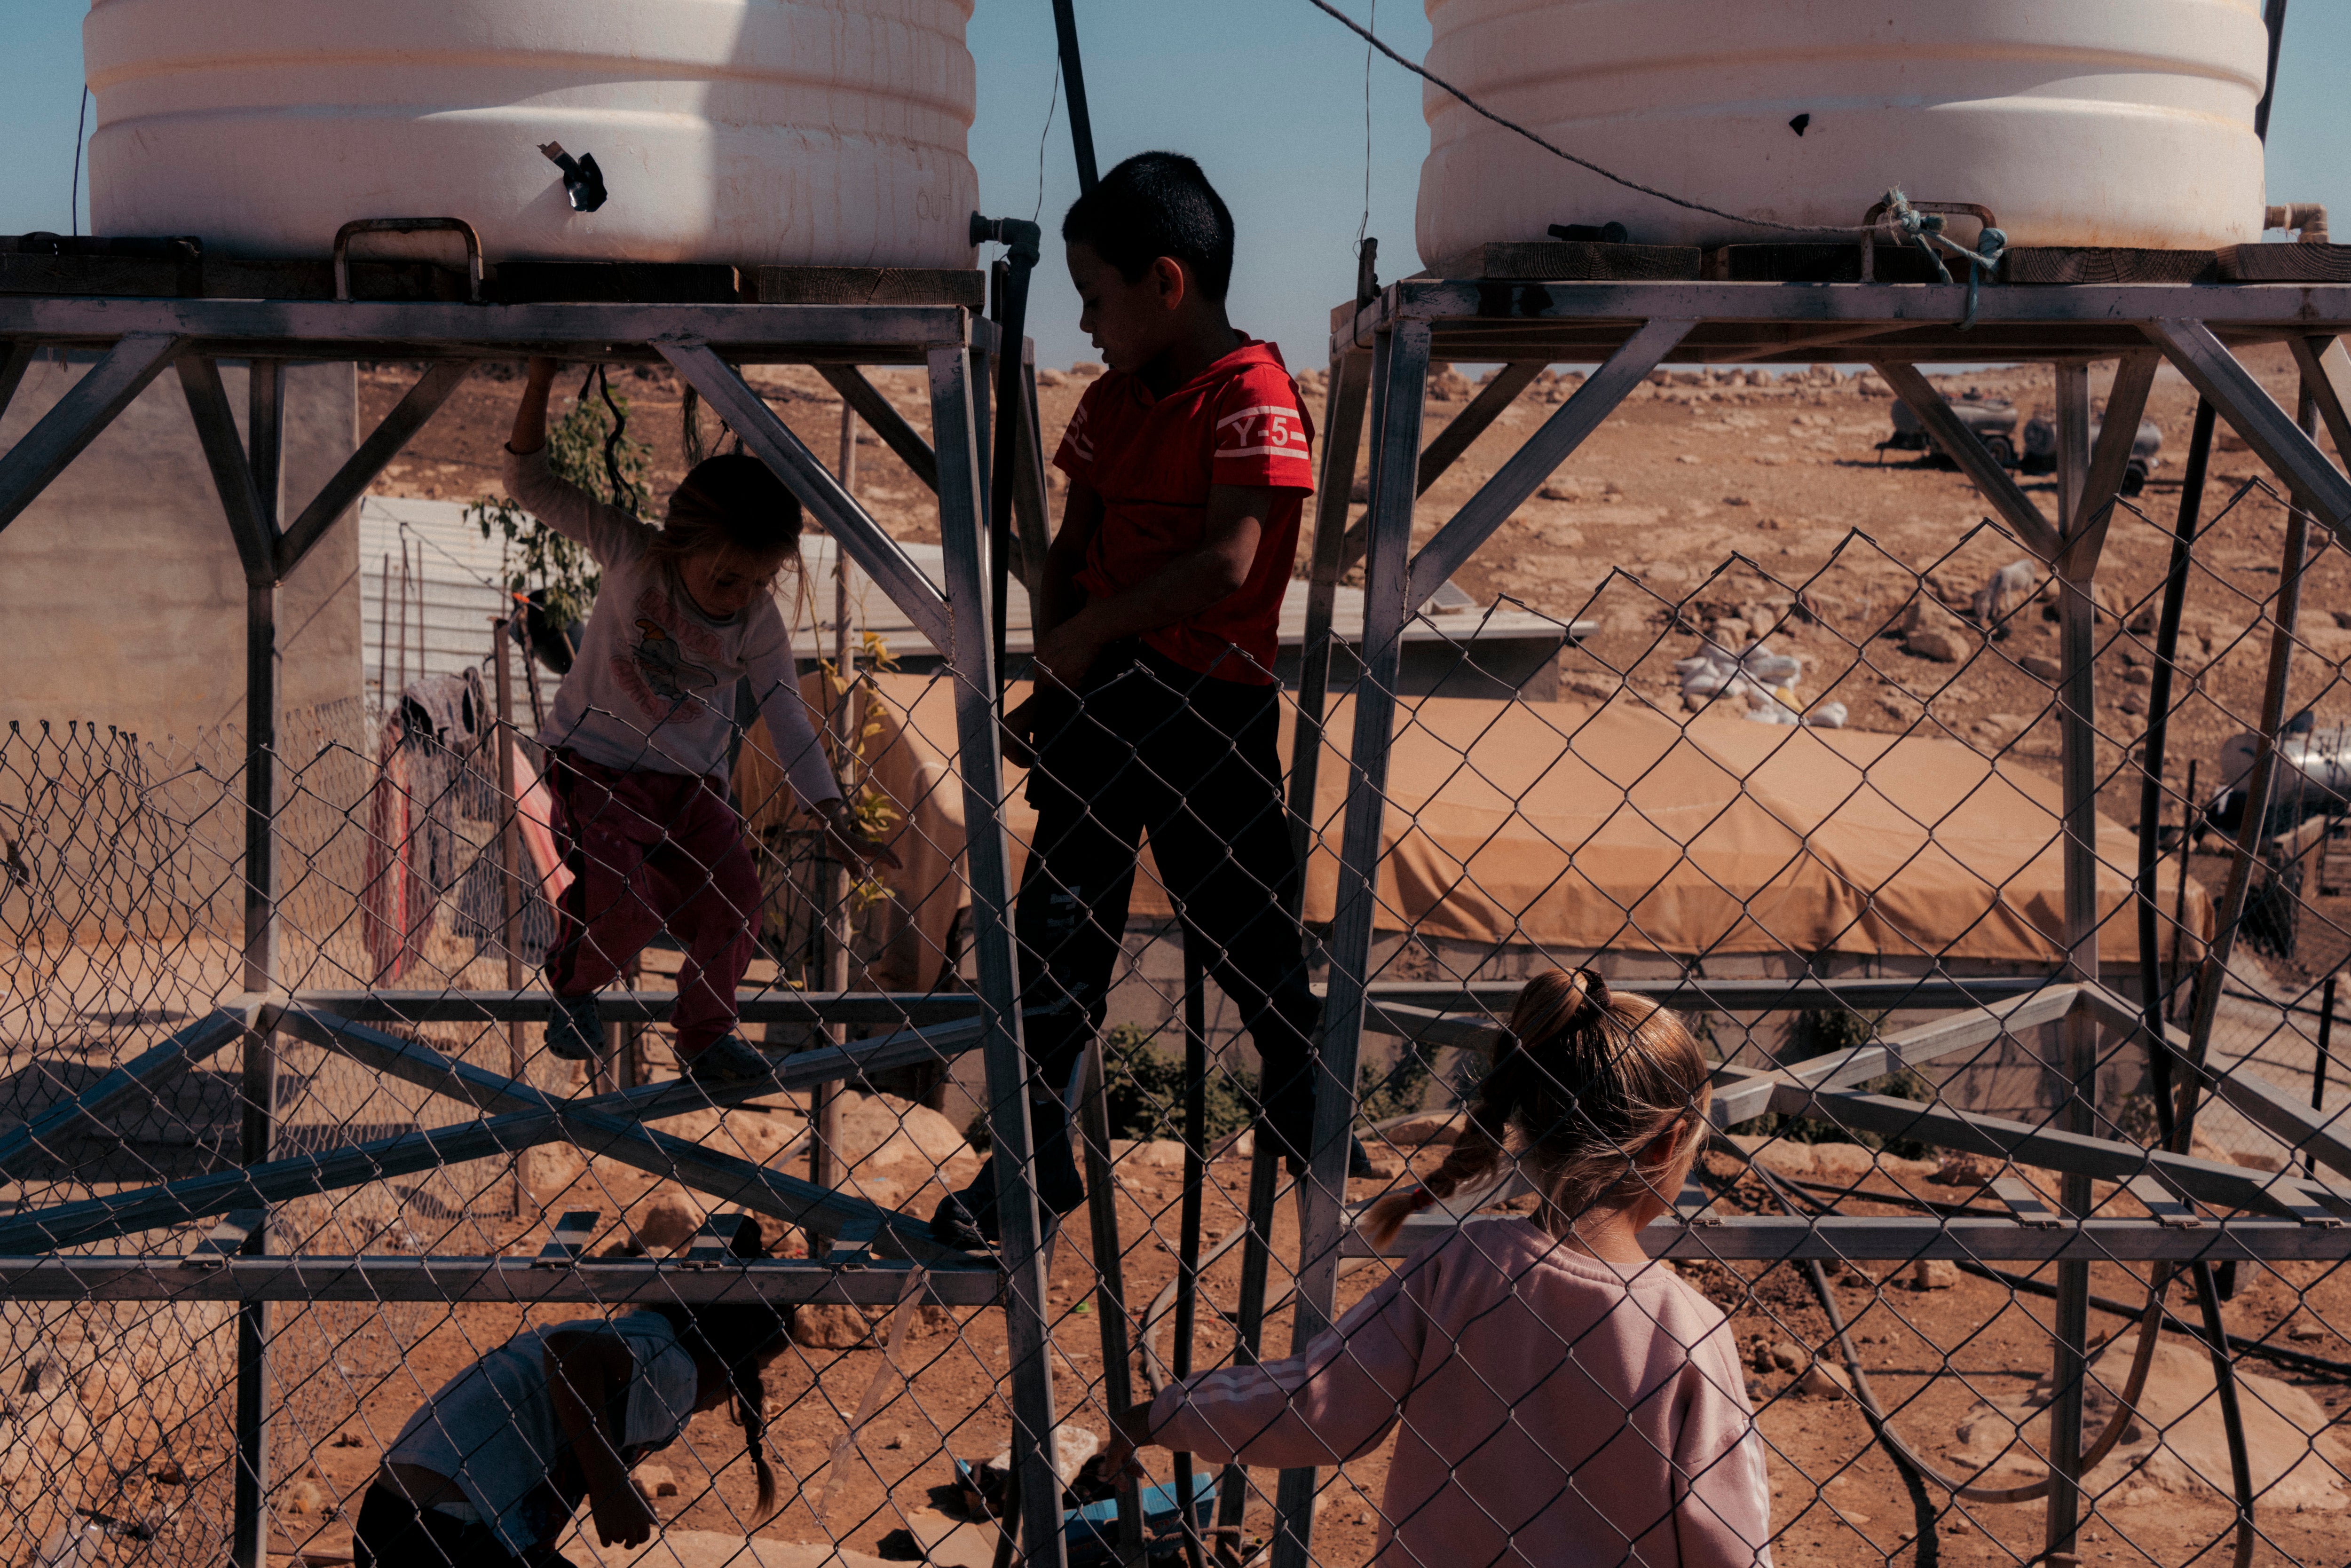 Children play around water tanks that were damaged by settlers during an attack in Tuba. Like many other communities in the South Hebron Hills, Tuba has often been attacked by settlers